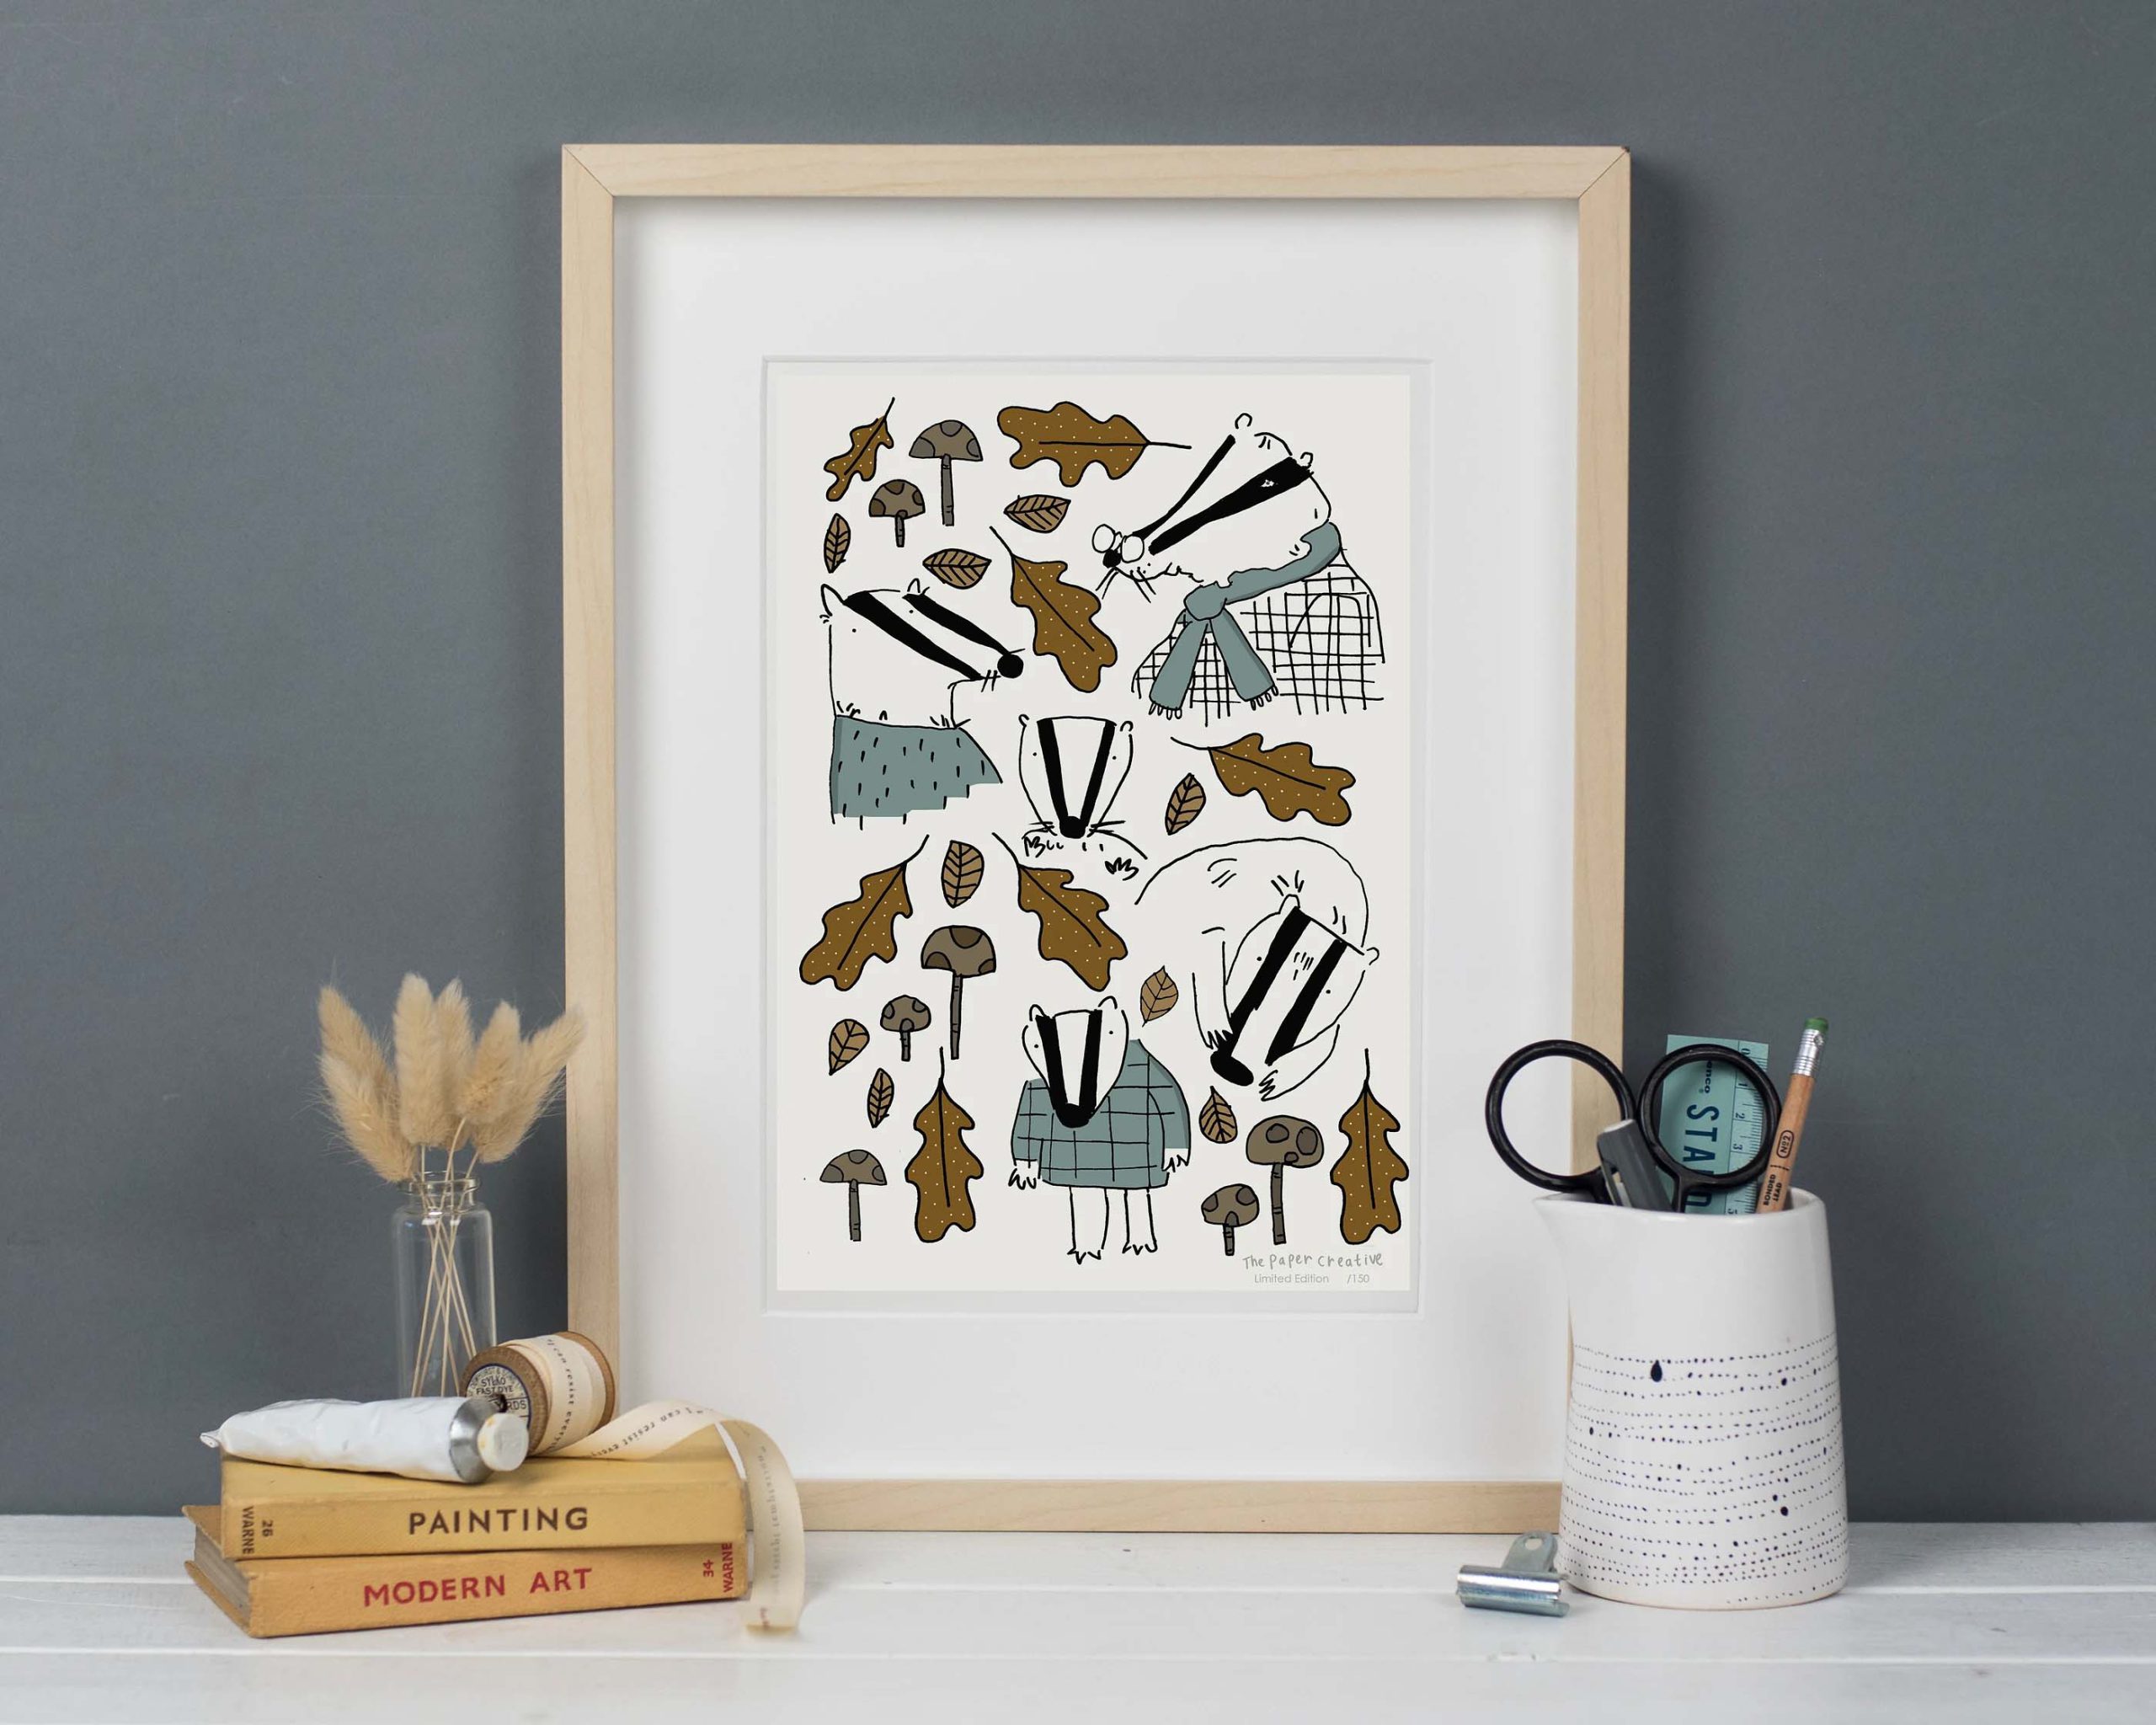 Hand illustrated badger and leaves character art print